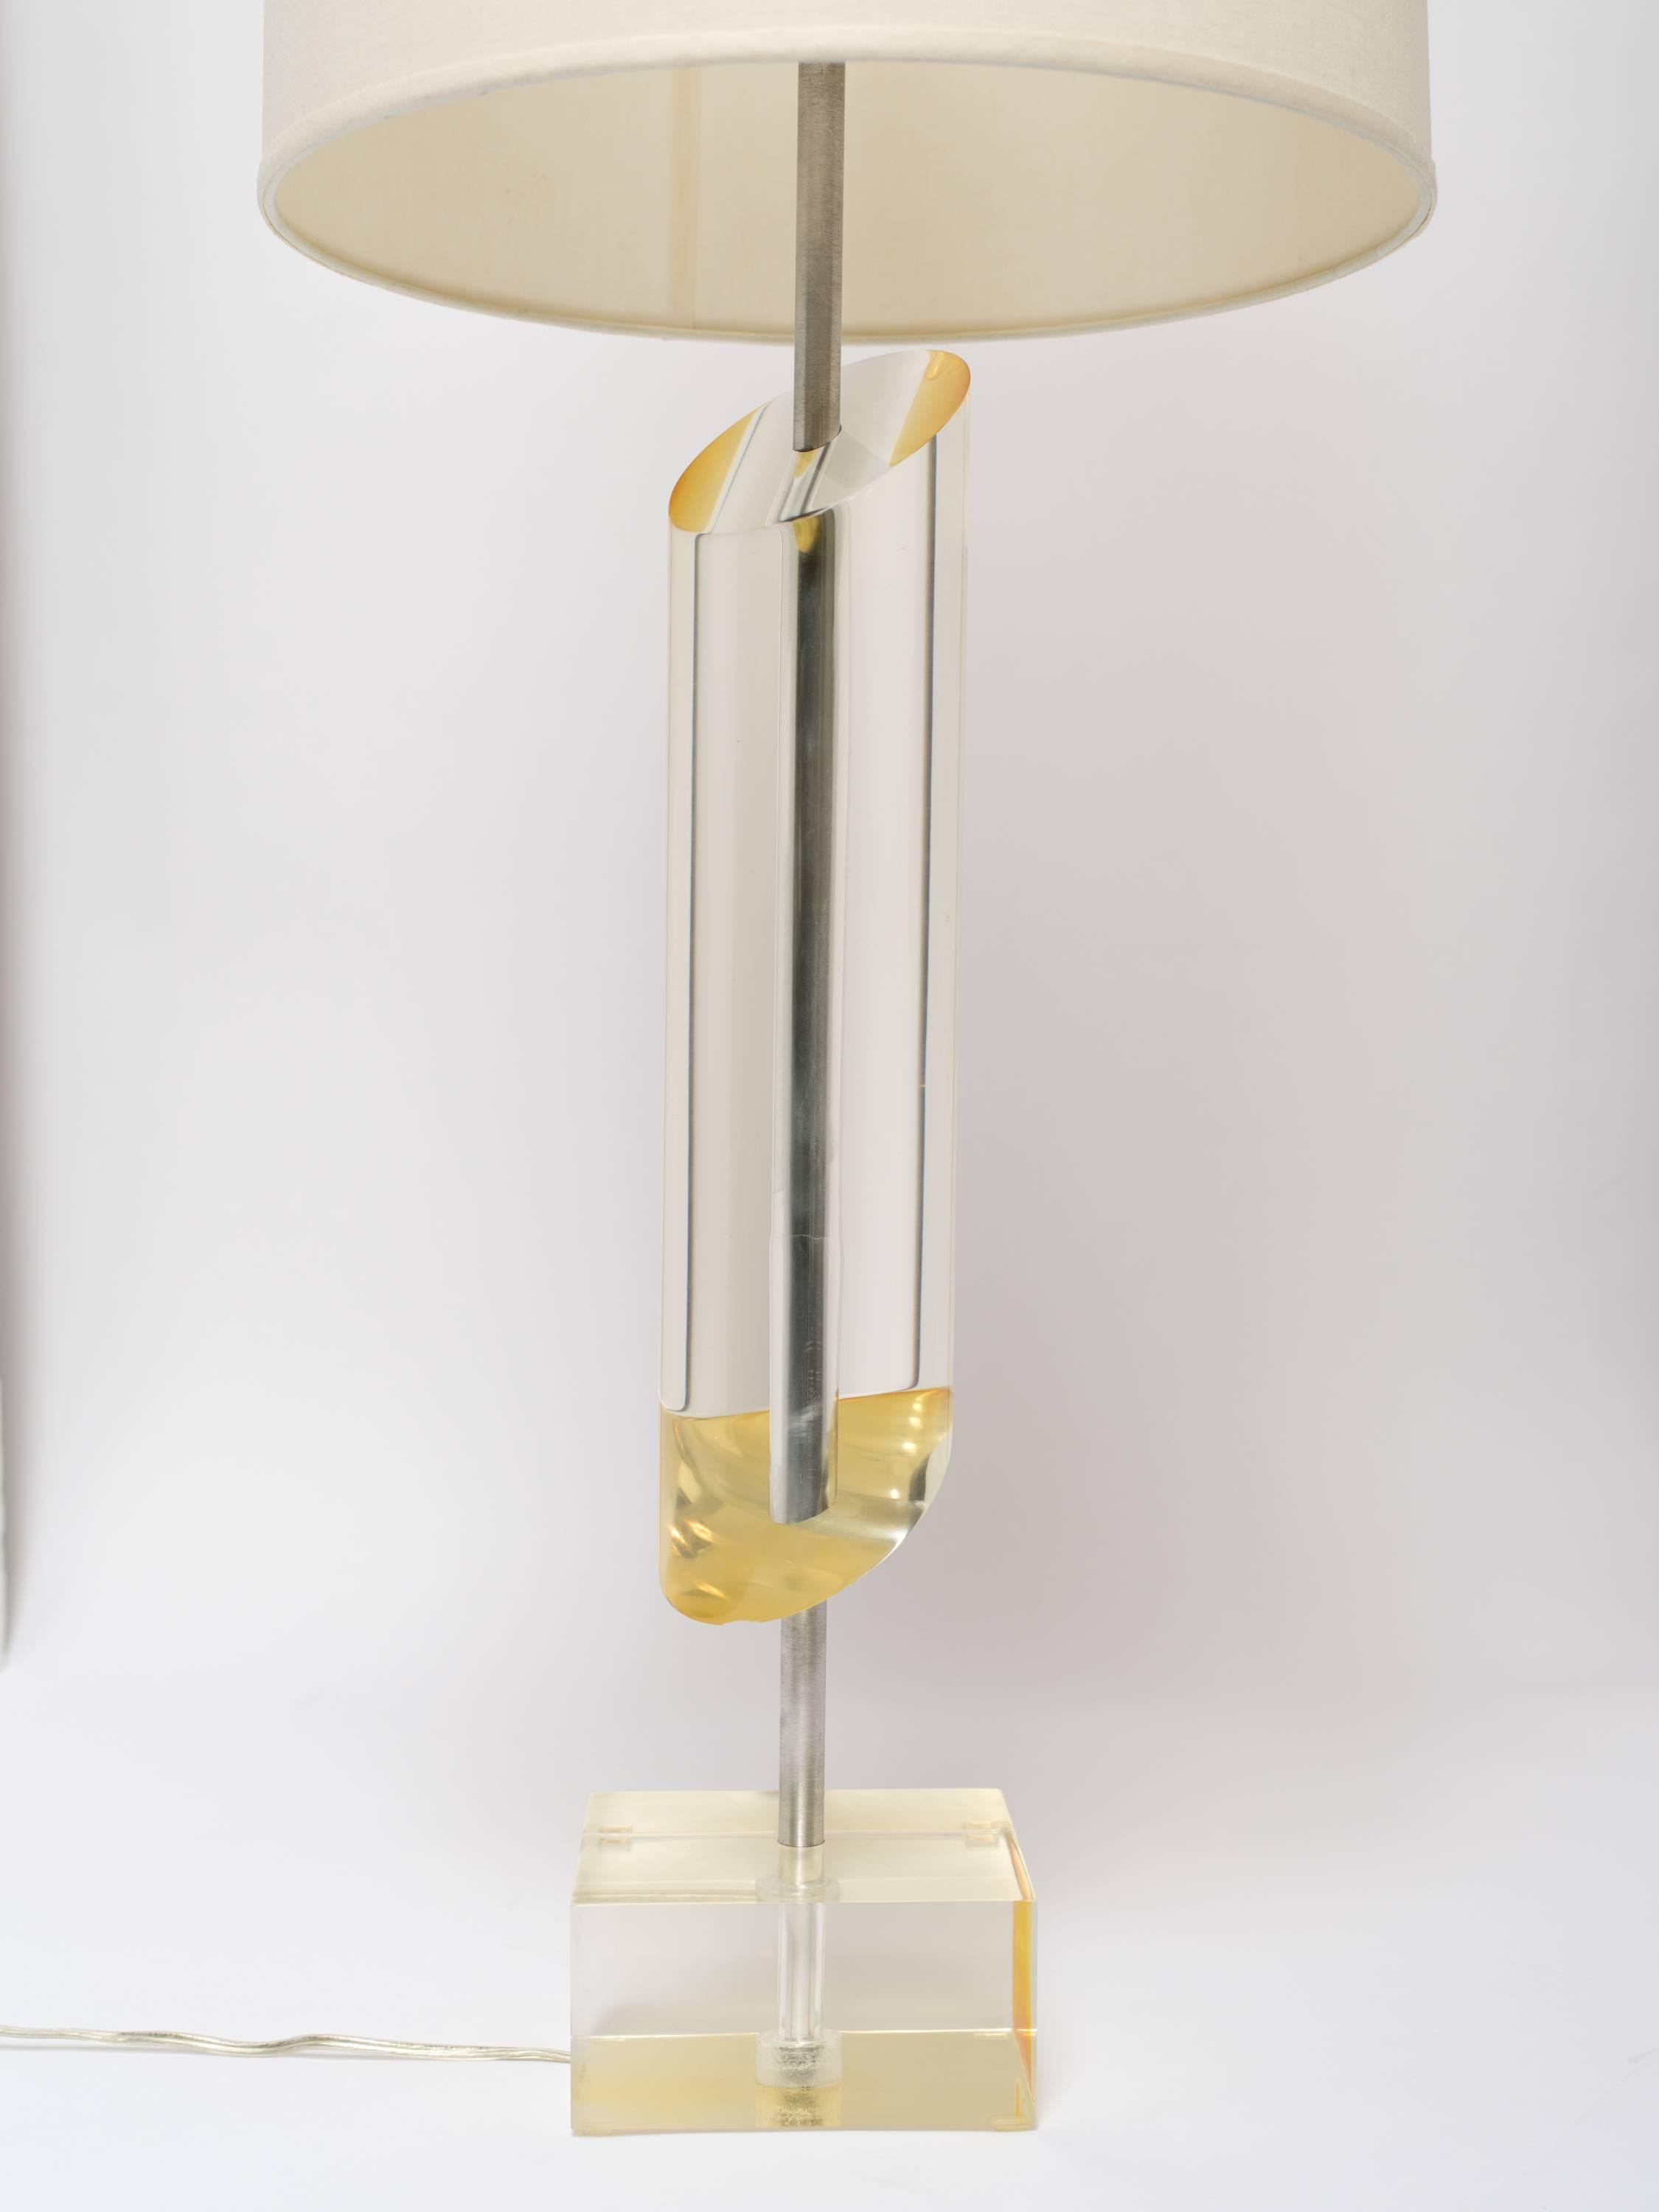 Sculptural mid-century modern lamp with slanted column design. Lamp is comprised of solid lucite cylinder with asymmetrical design and heavyset lucite base.  Lucite has amber or golden undertones and is fitted with and two lights, featuring on/off